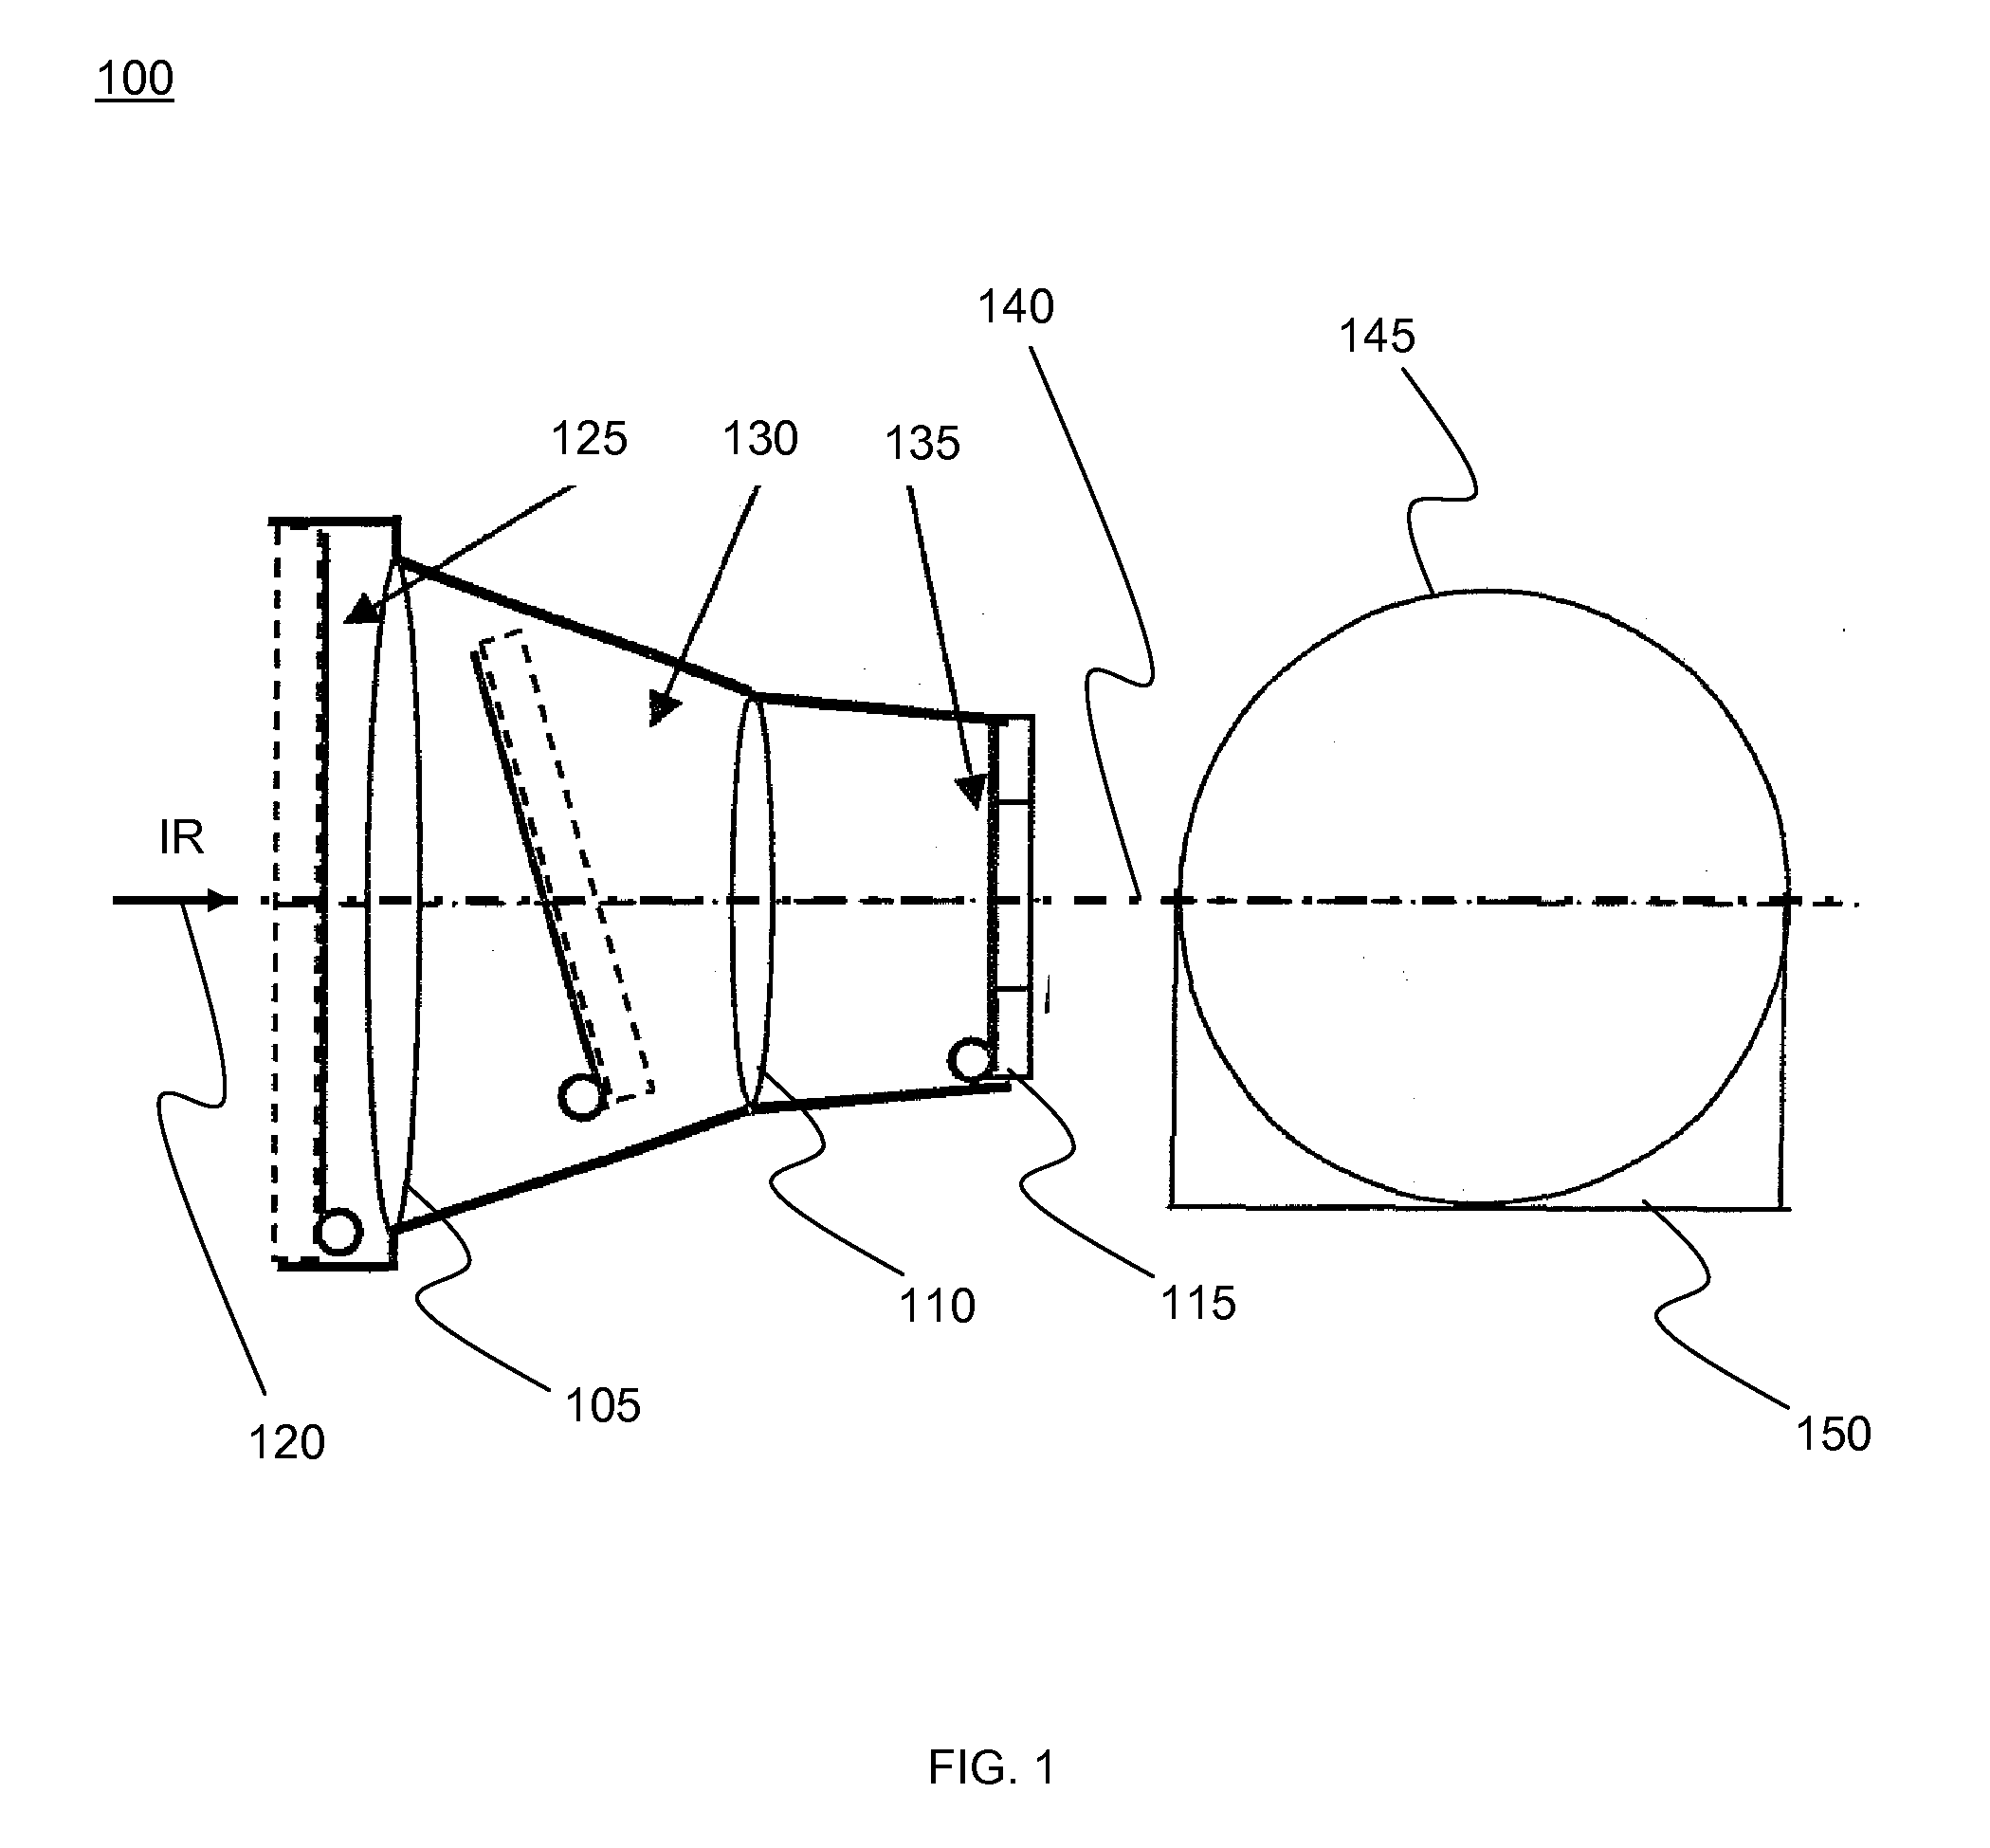 Fast electrostatic shutter and method of achieving offset compensation in infrared video imagers using fast shutters